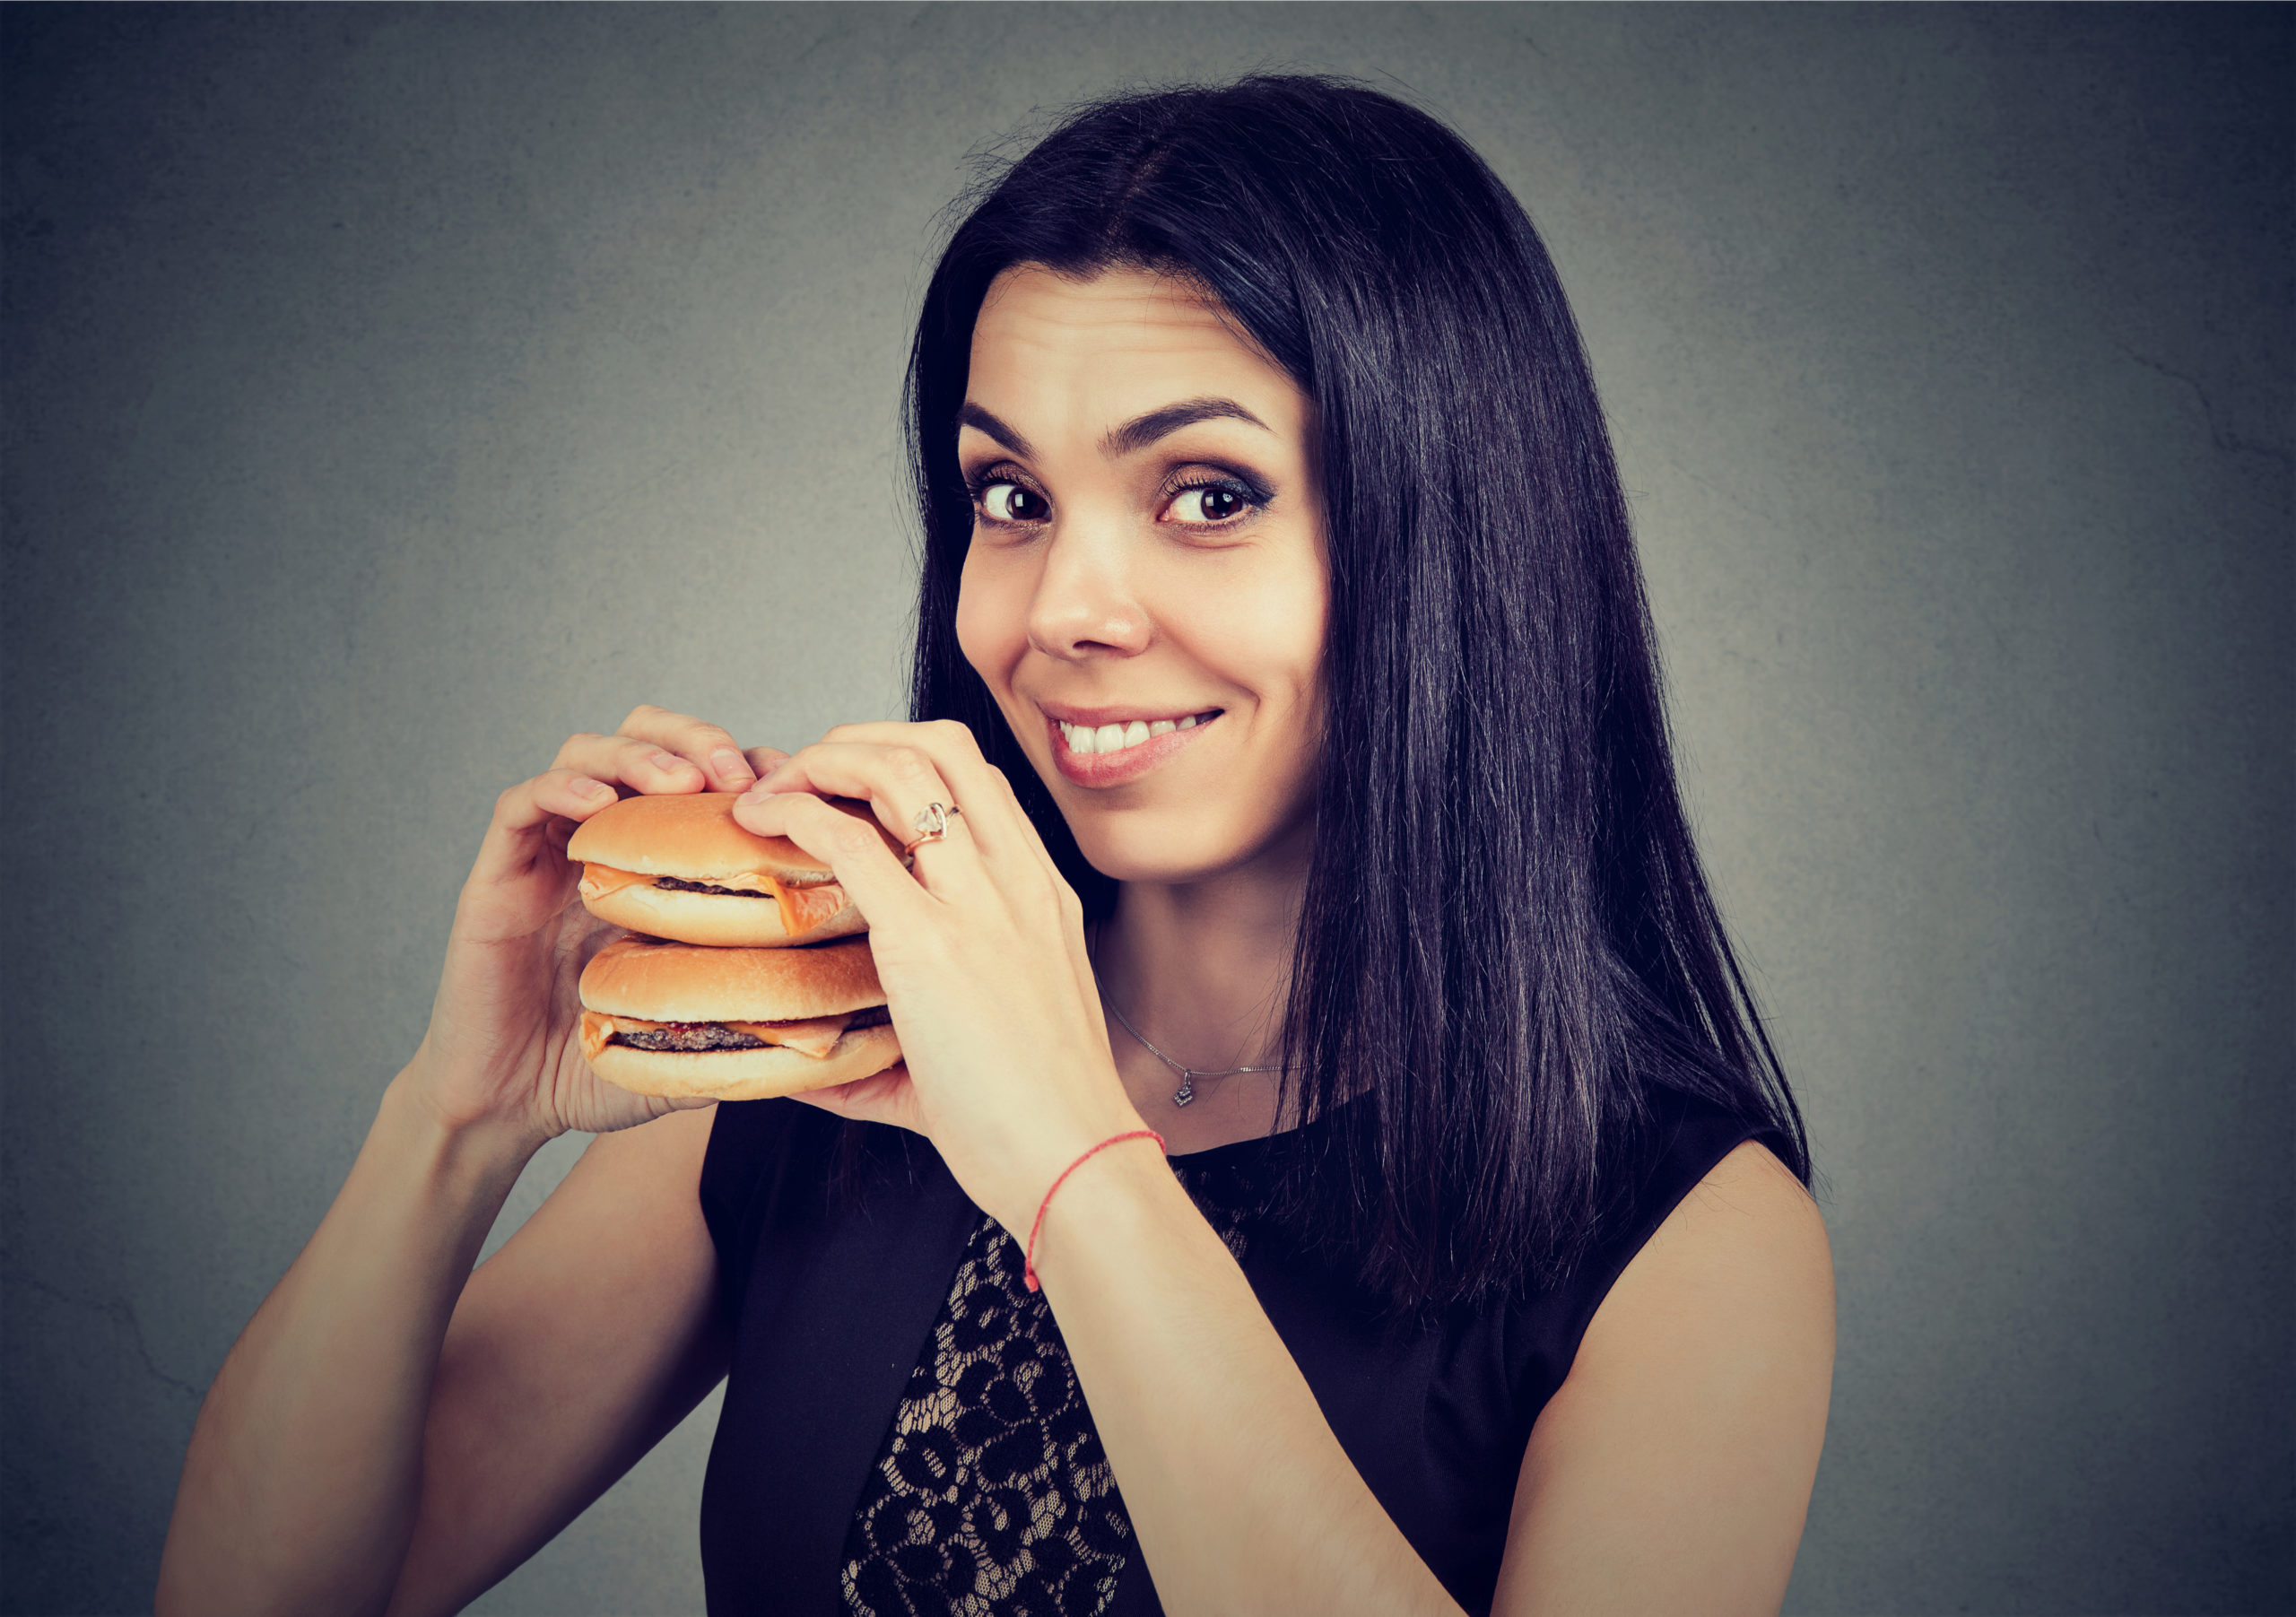 Lady in white t shirt trying to eat a burger with her mouth wide open